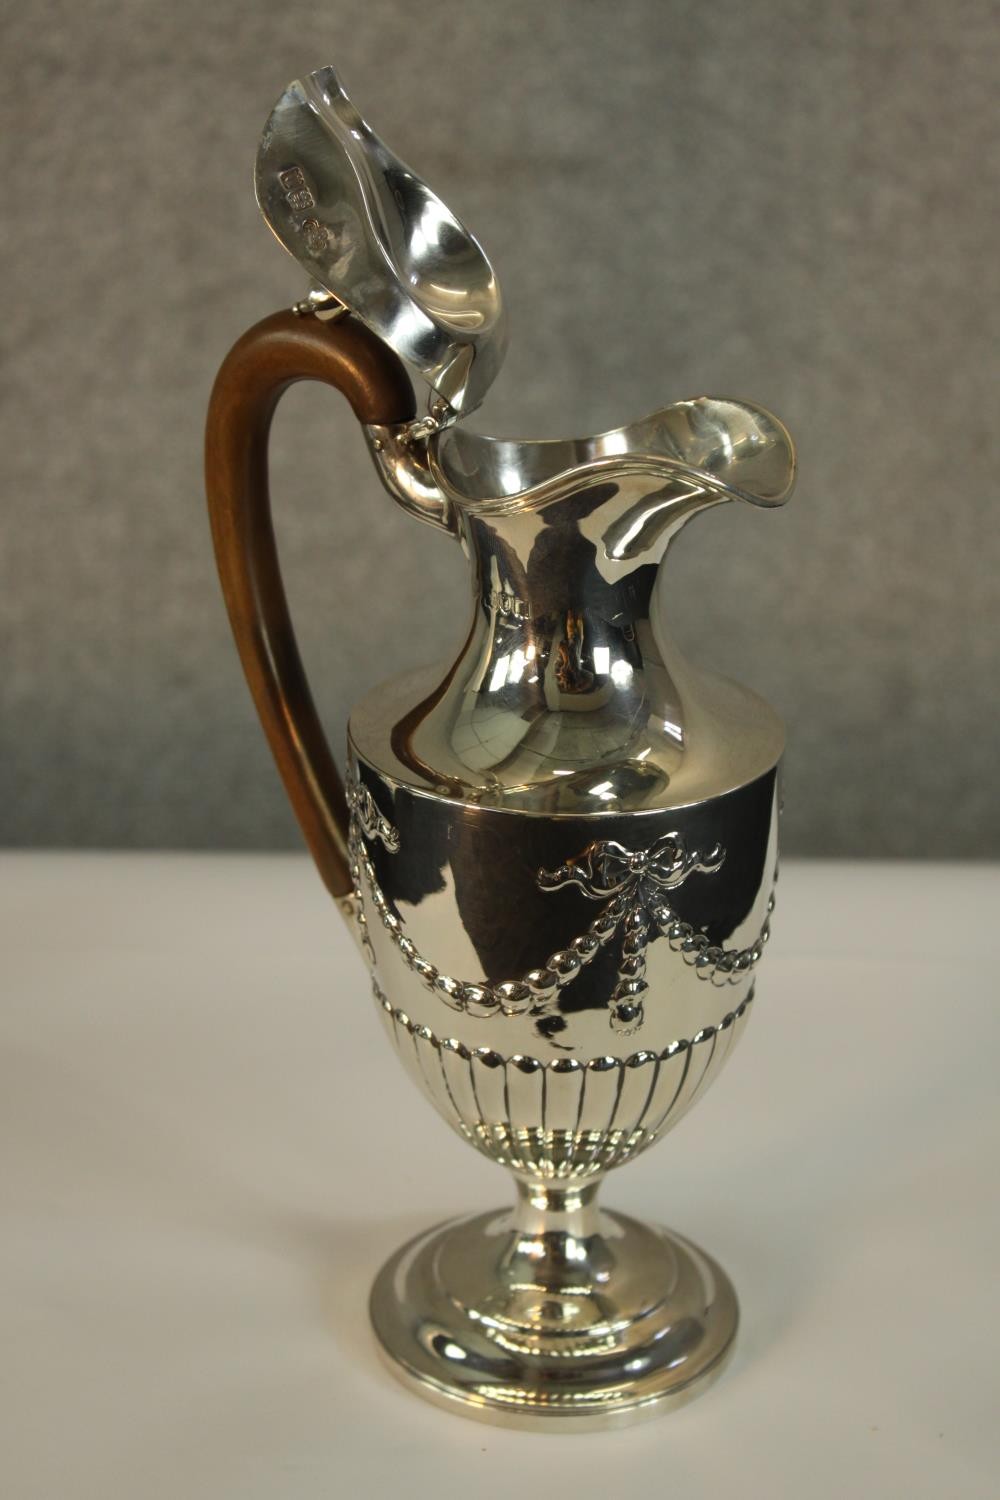 An Edwardian hallmarked silver coffee pot, hallmarked for Gold & Silversmiths Company, London - Image 3 of 4